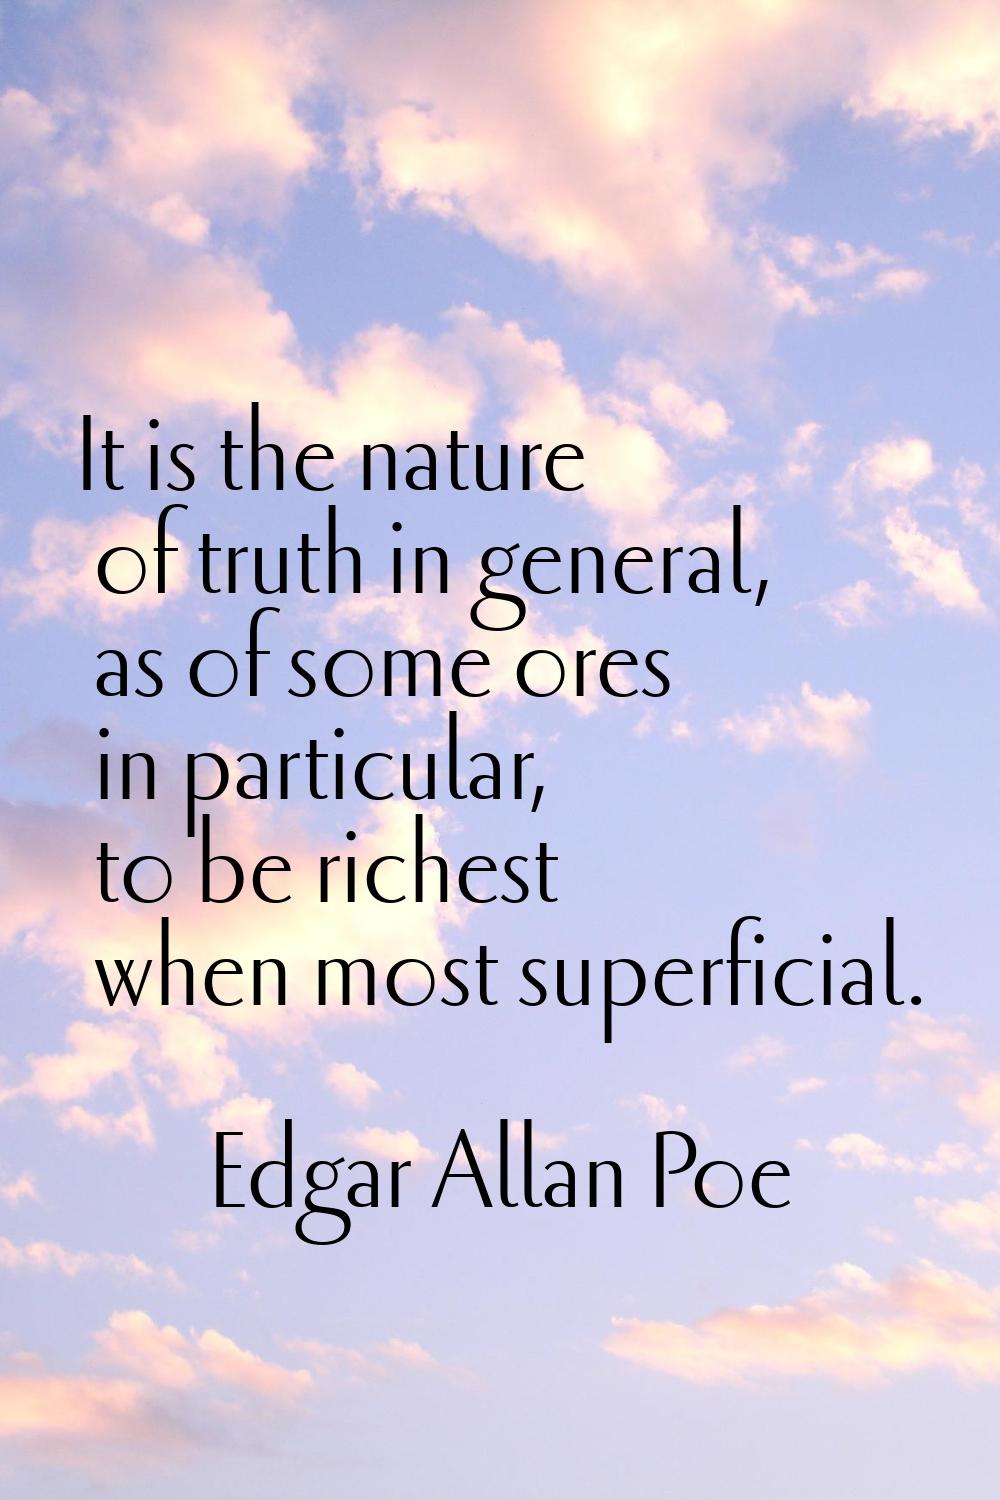 It is the nature of truth in general, as of some ores in particular, to be richest when most superf